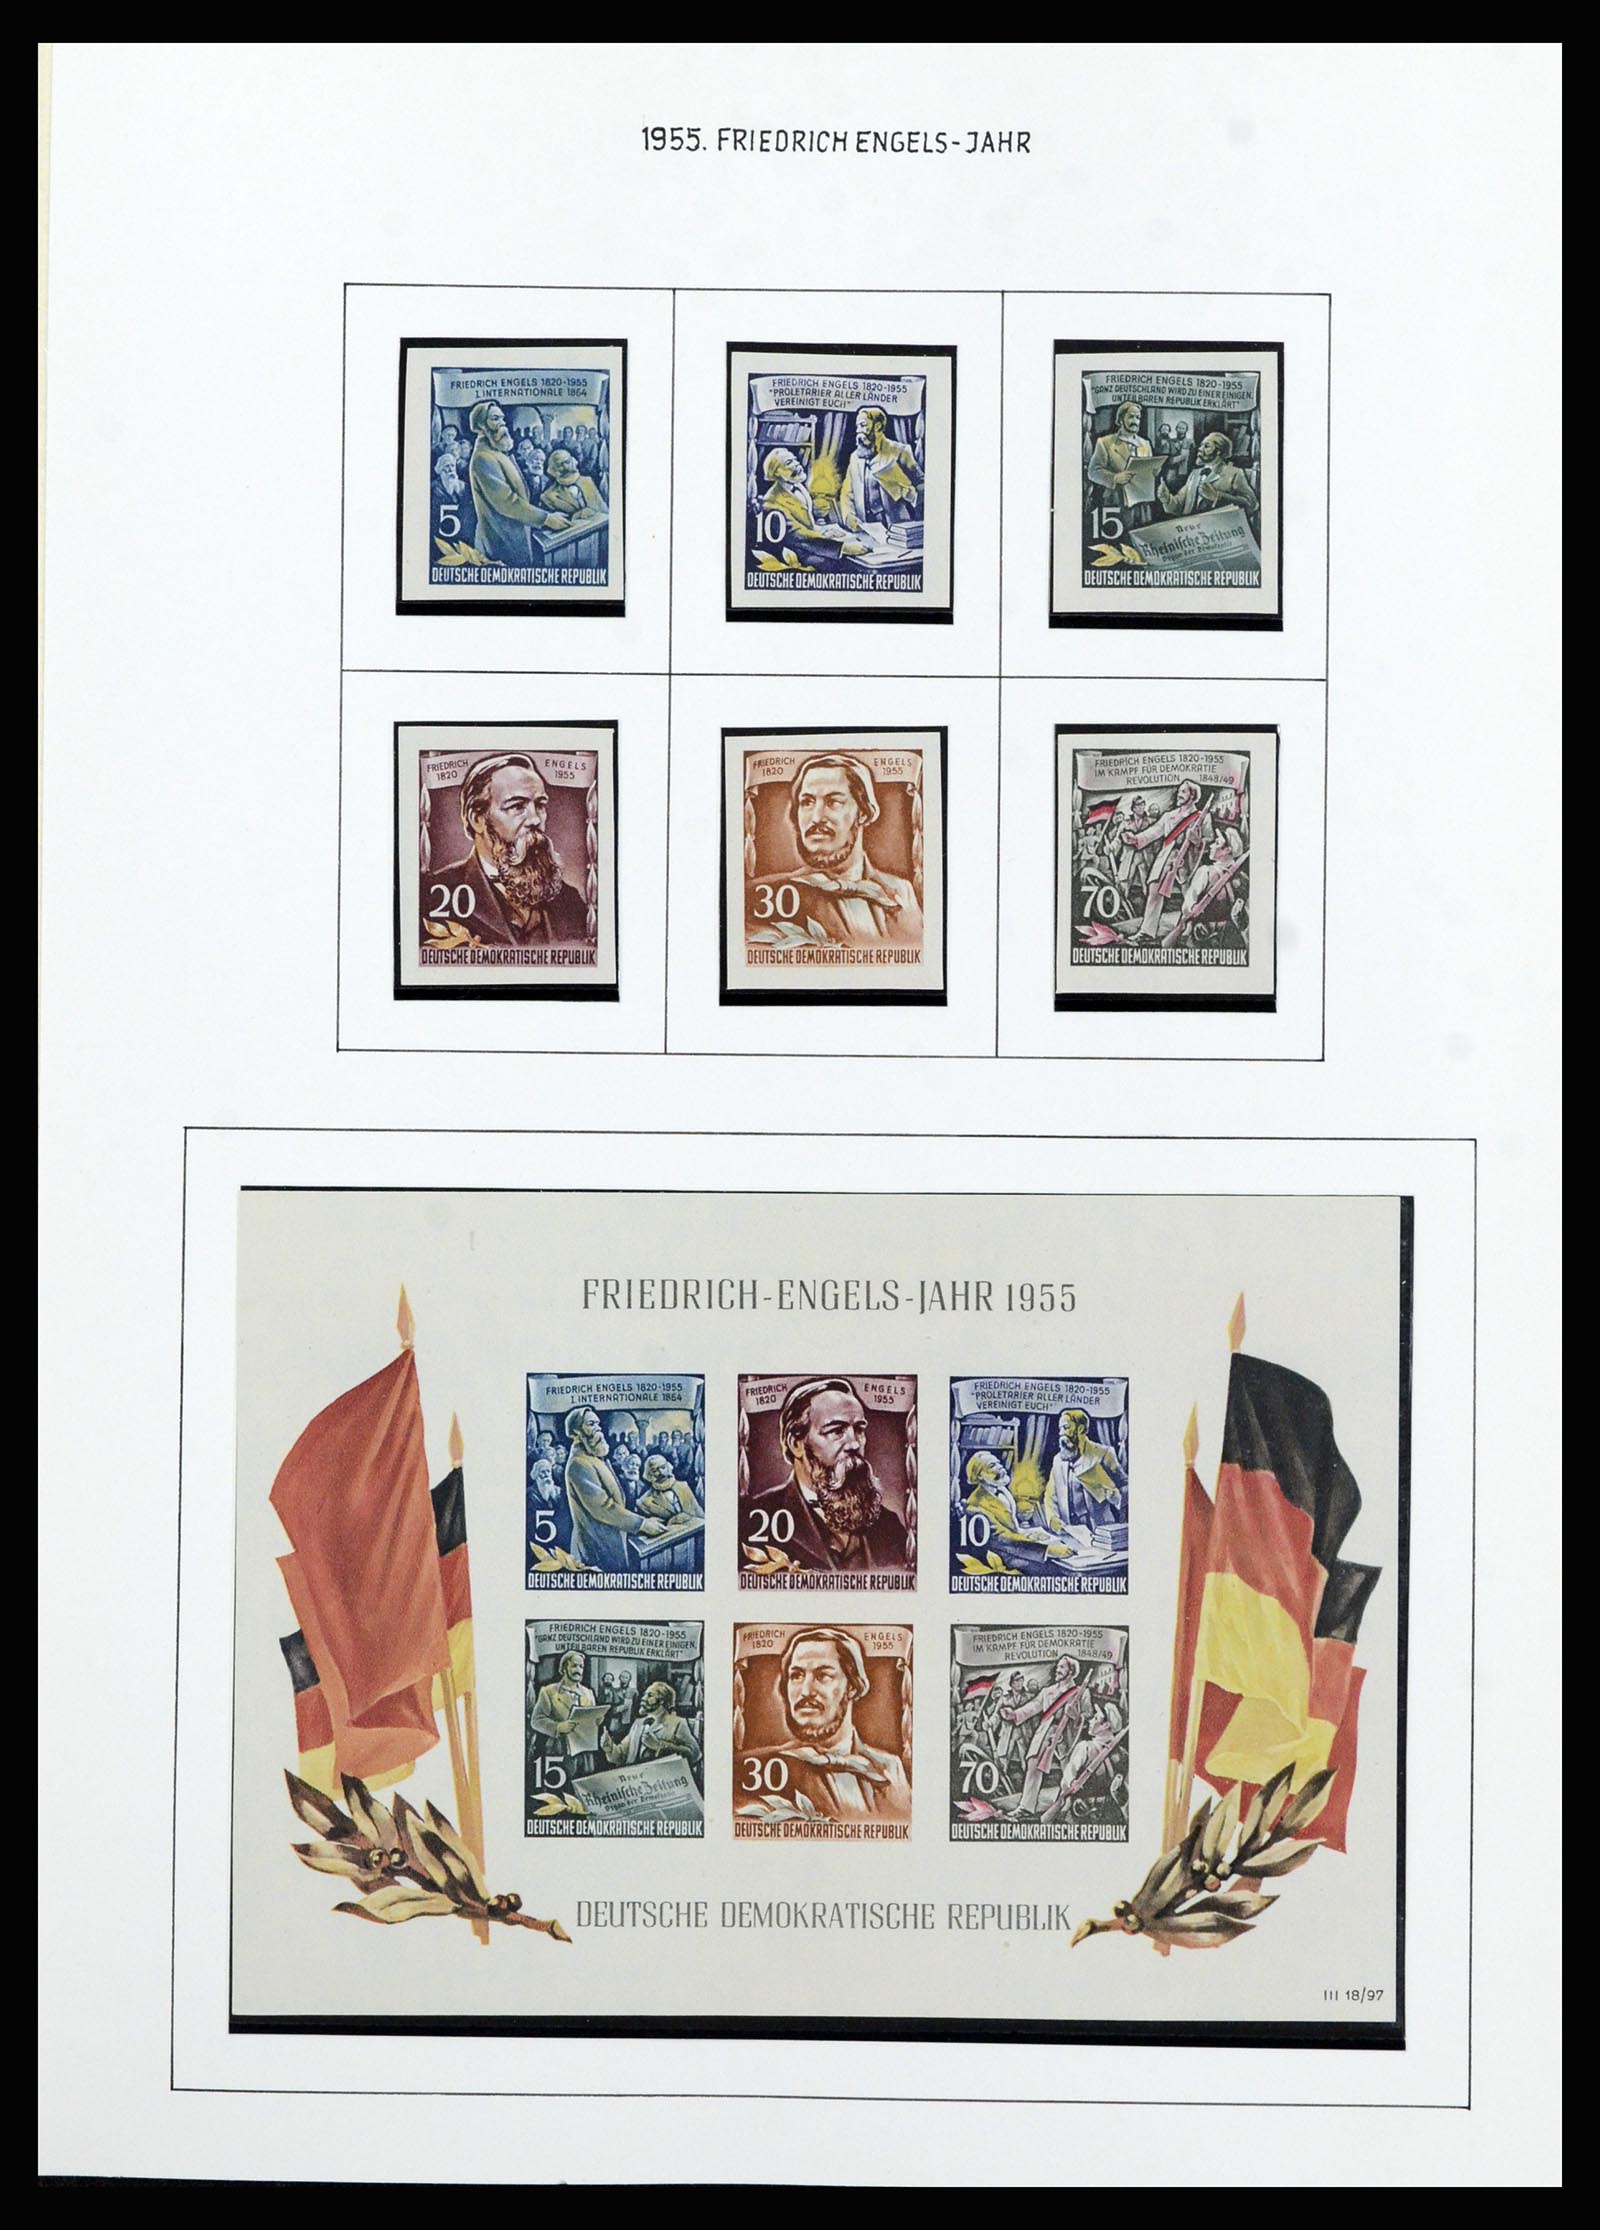 37101 024 - Stamp collection 37101 GDR 1954-1960.